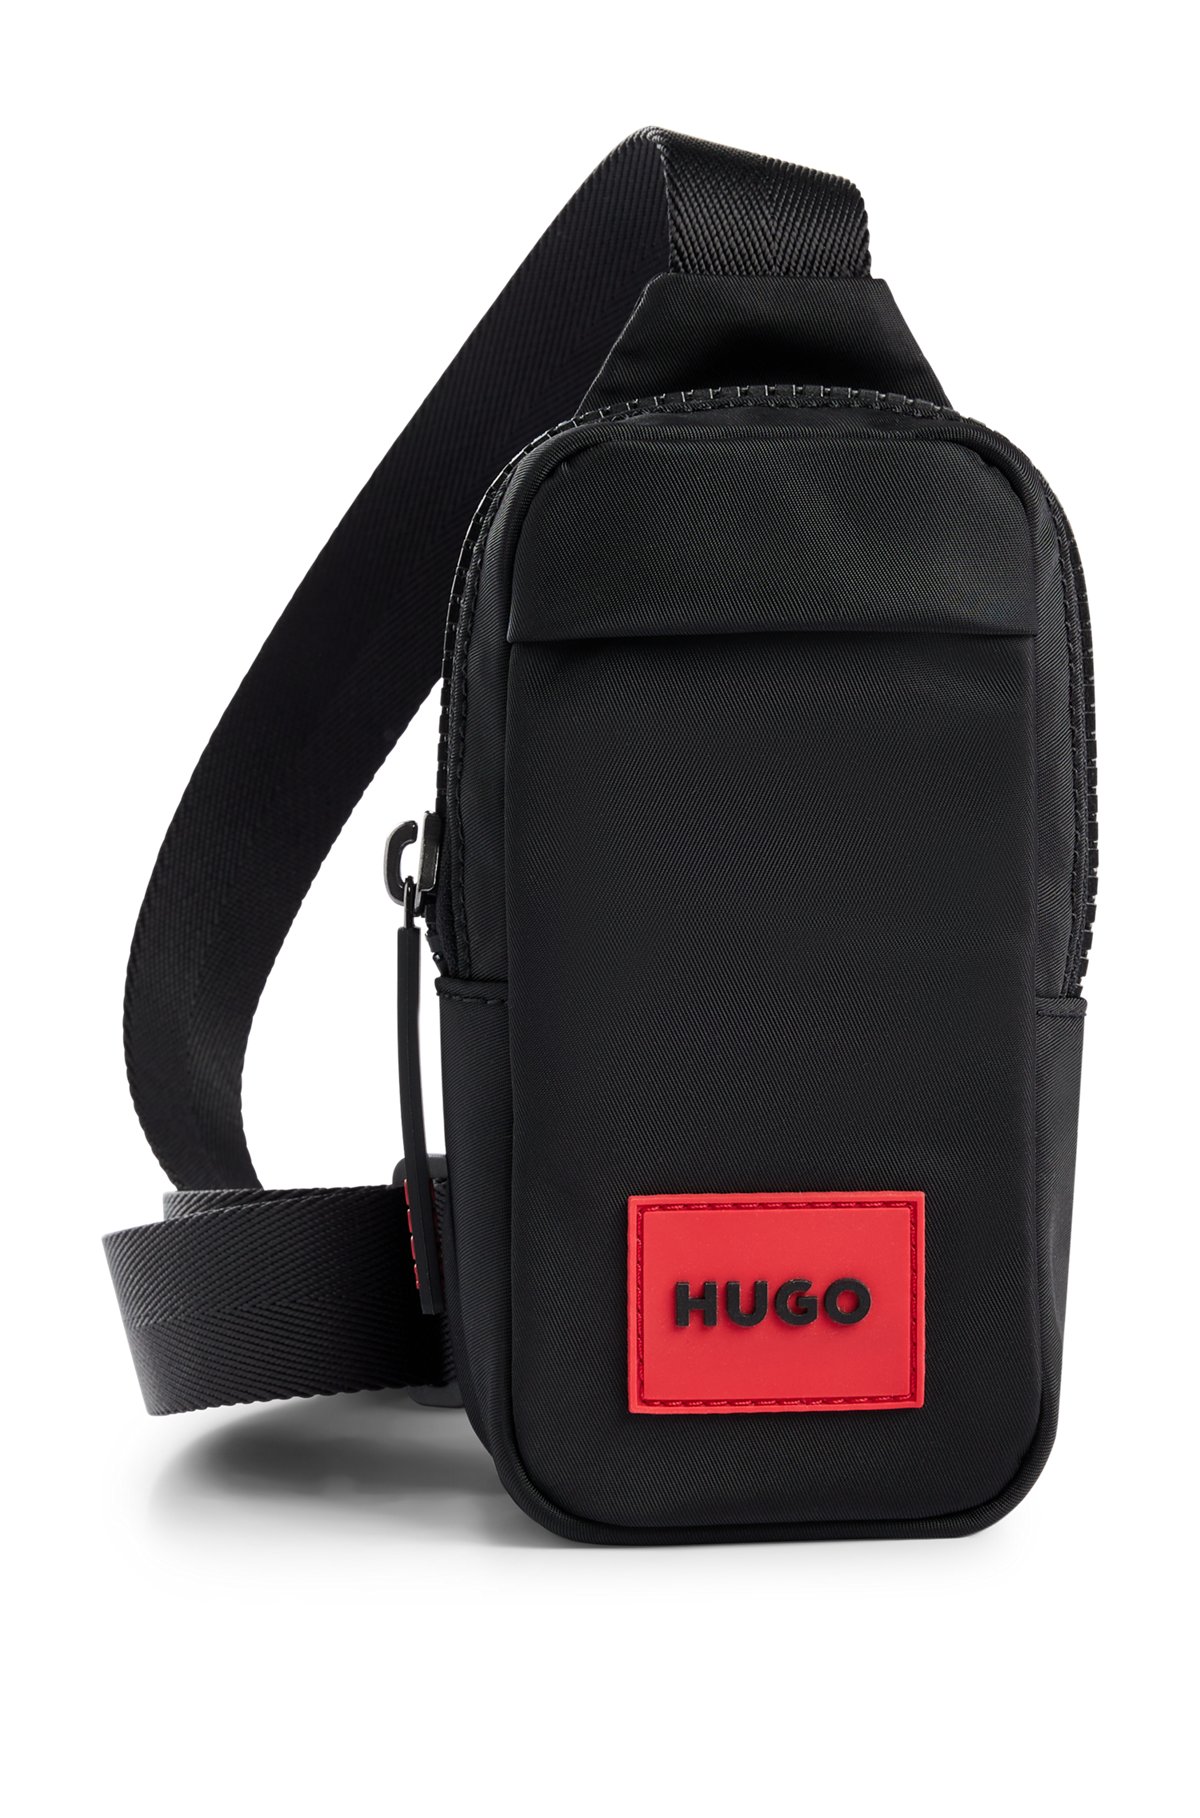 HUGO - Reporter bag with red logo patch